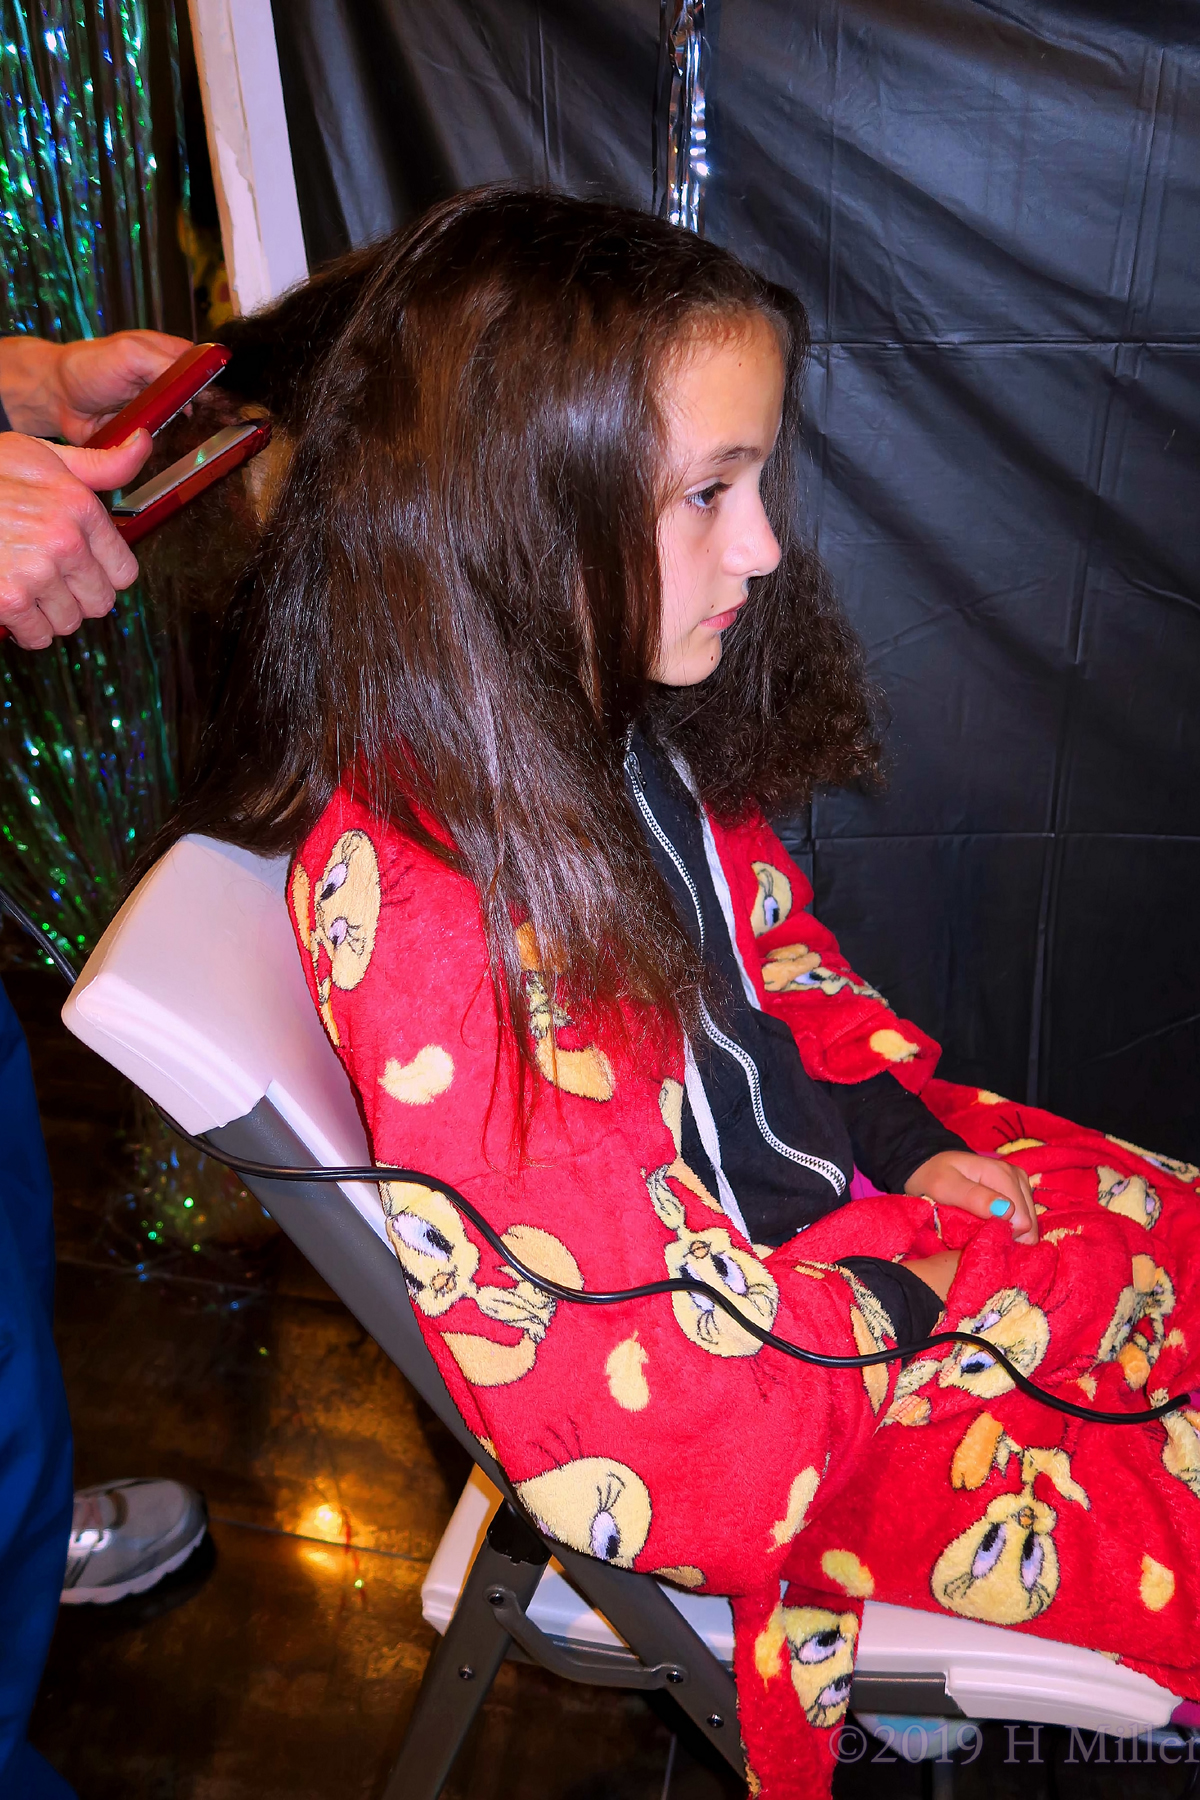 Taming The Curls With A Straightened Kids Hairstyle On This Party Guest! 1